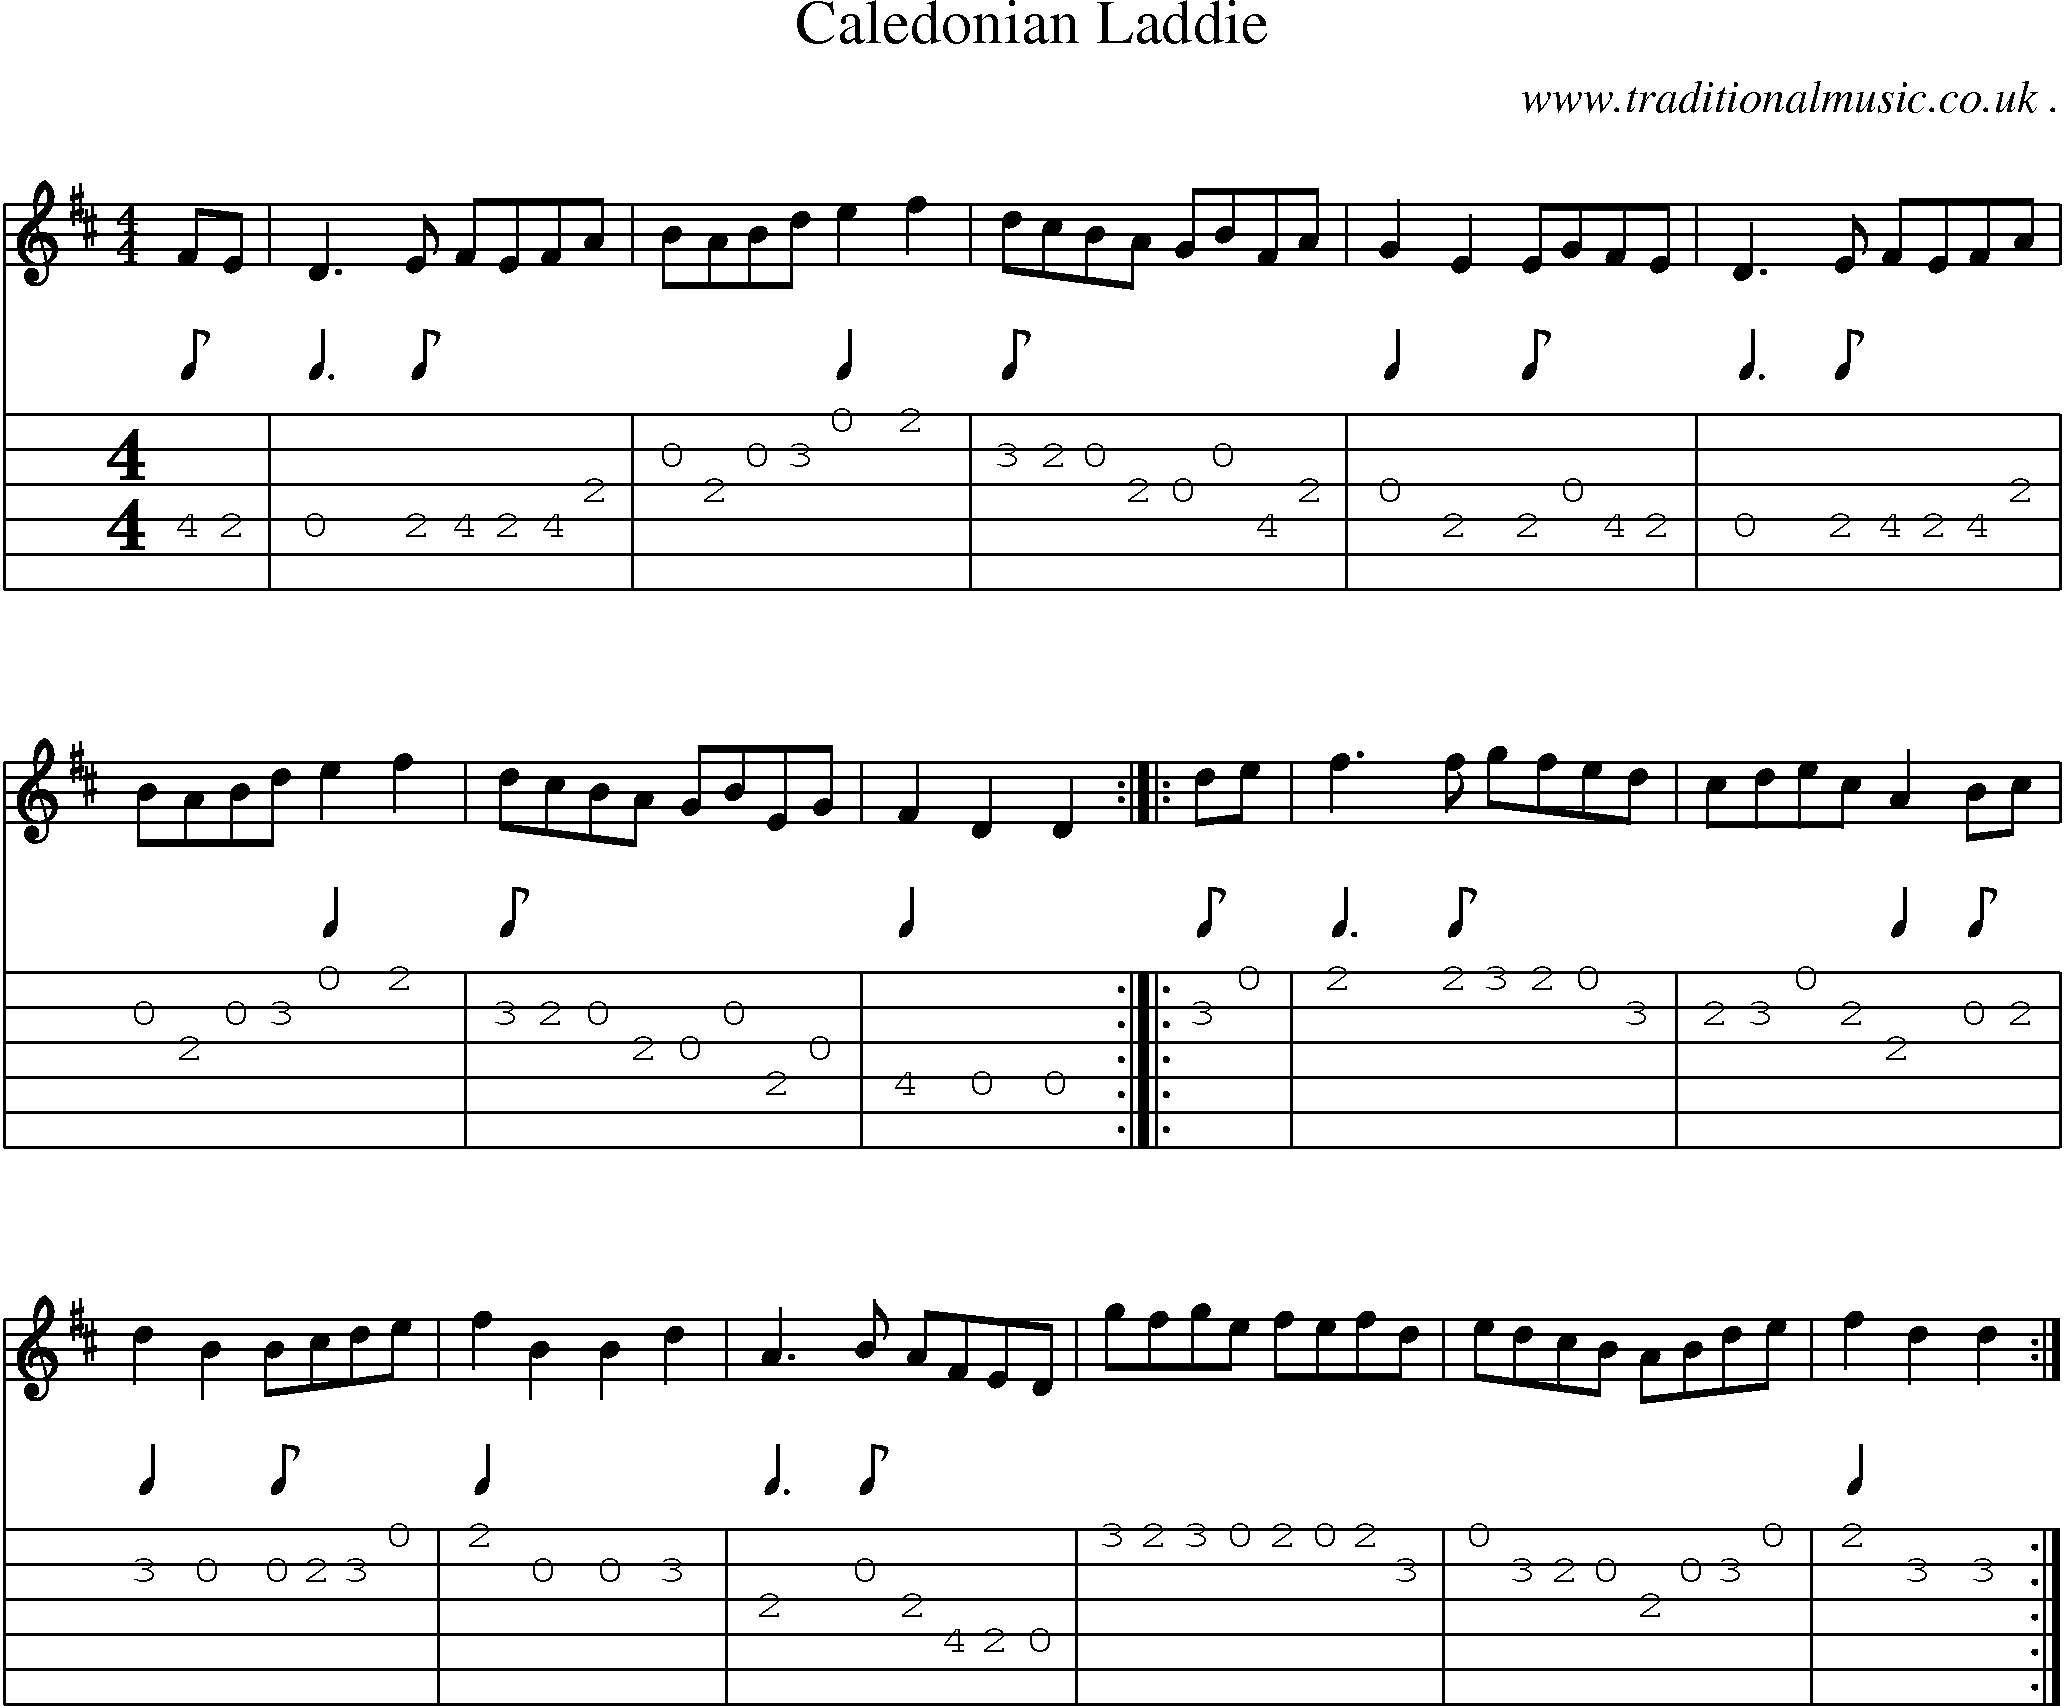 Sheet-music  score, Chords and Guitar Tabs for Caledonian Laddie